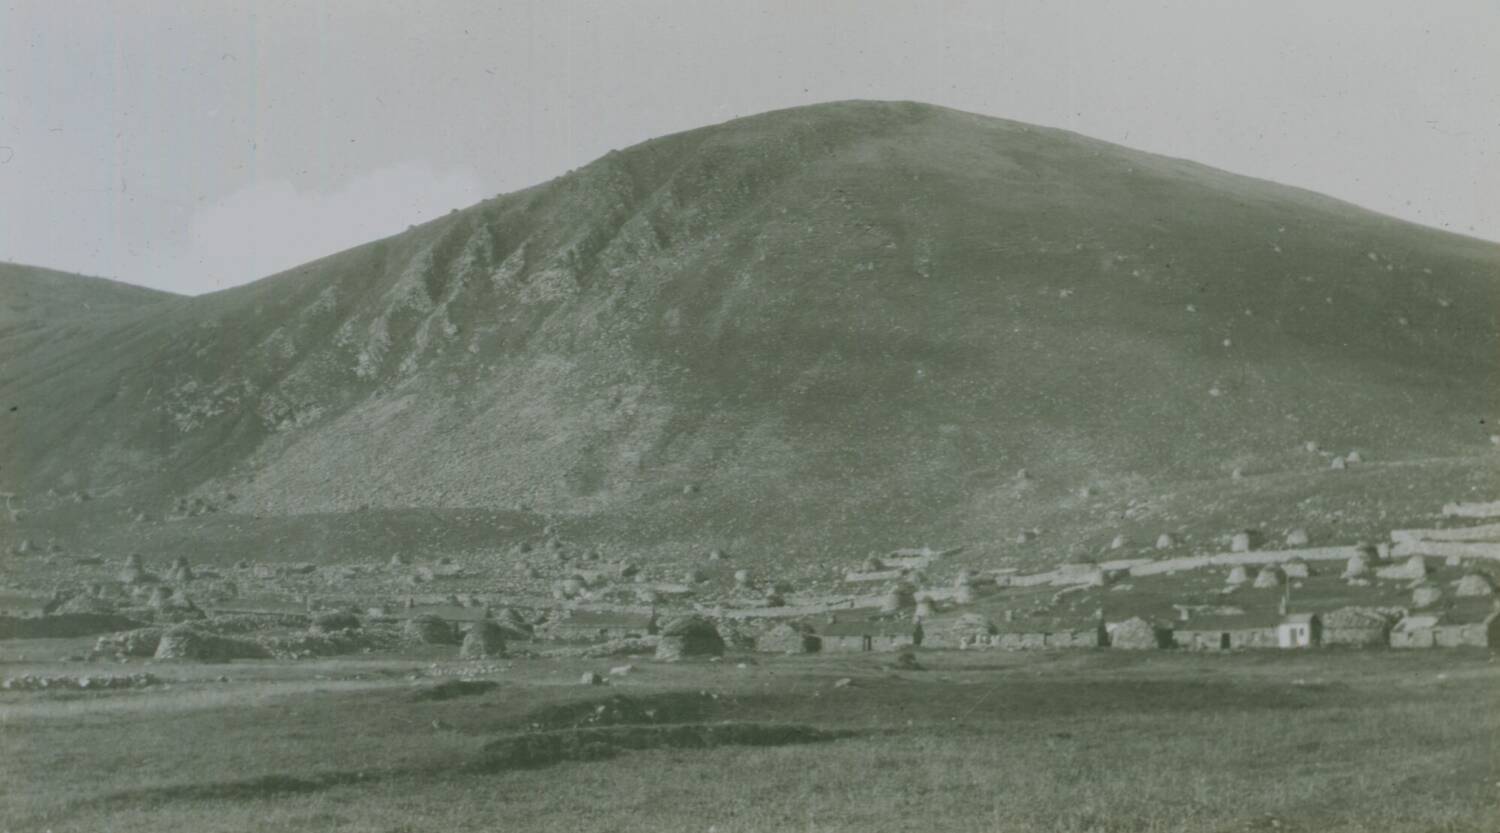 Black and white archival image of the village on Hirta, St Kilda. The large mountain of Conachair is in the background.